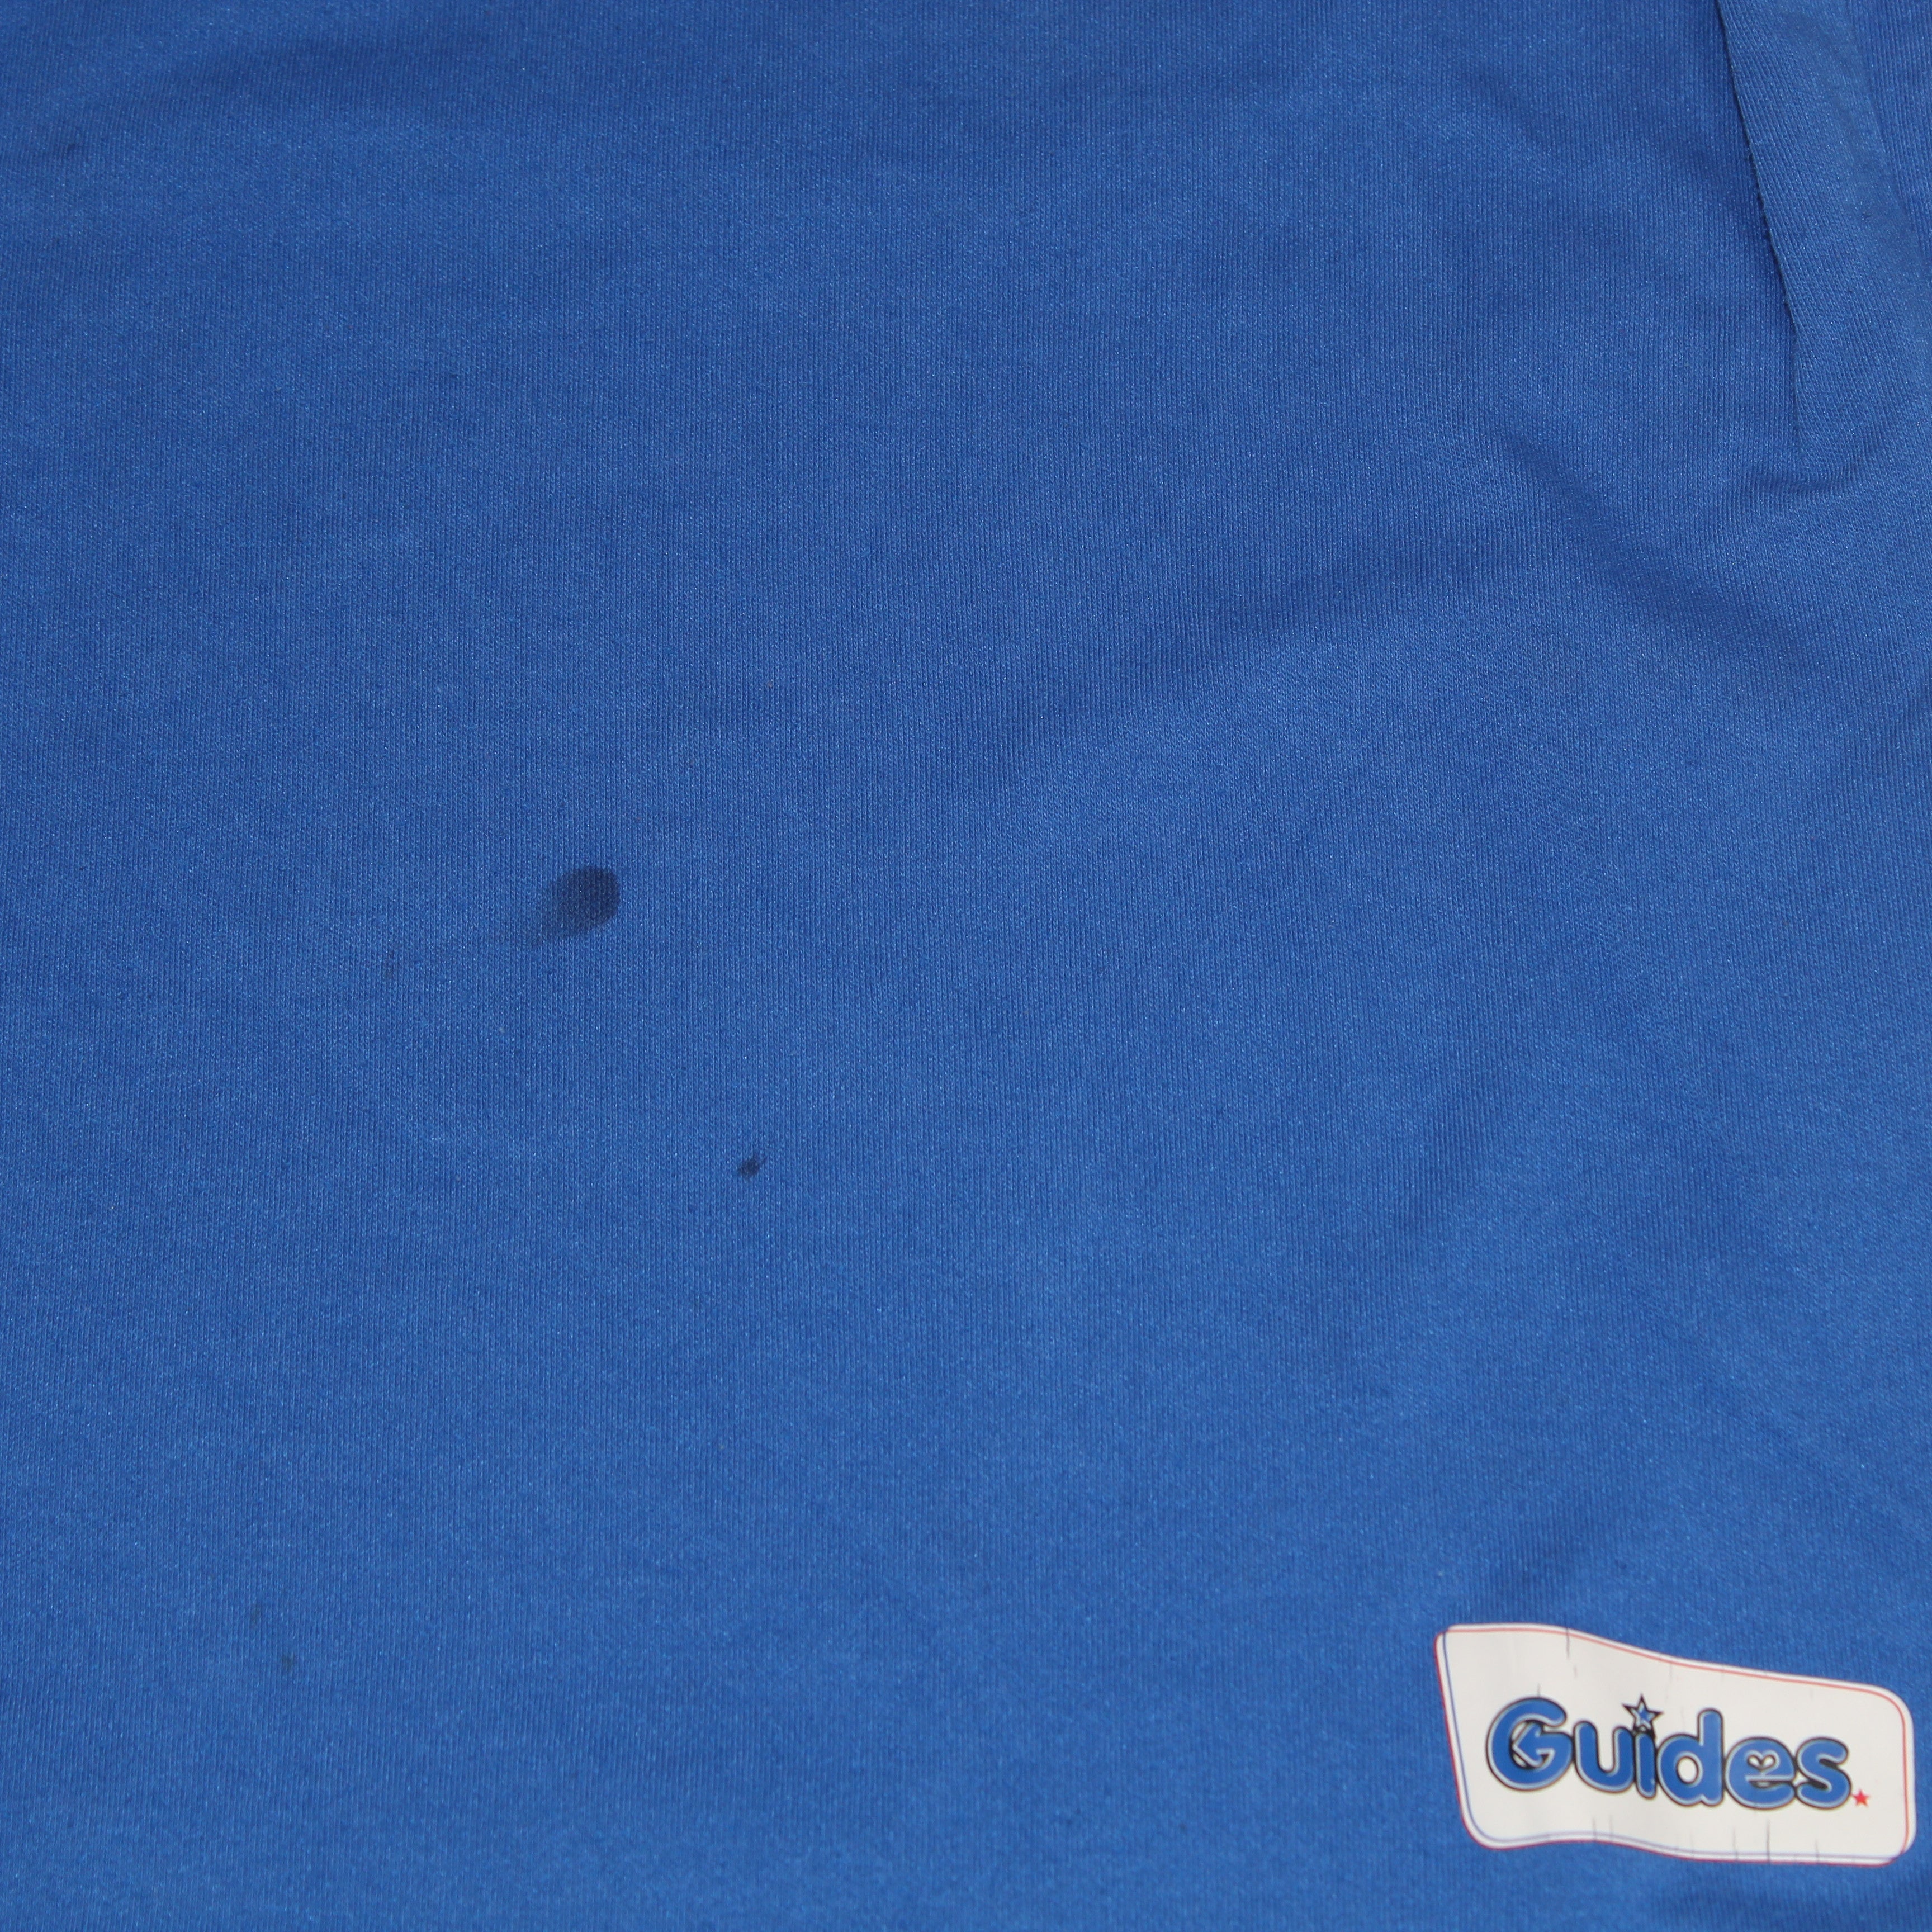 Guides Tee